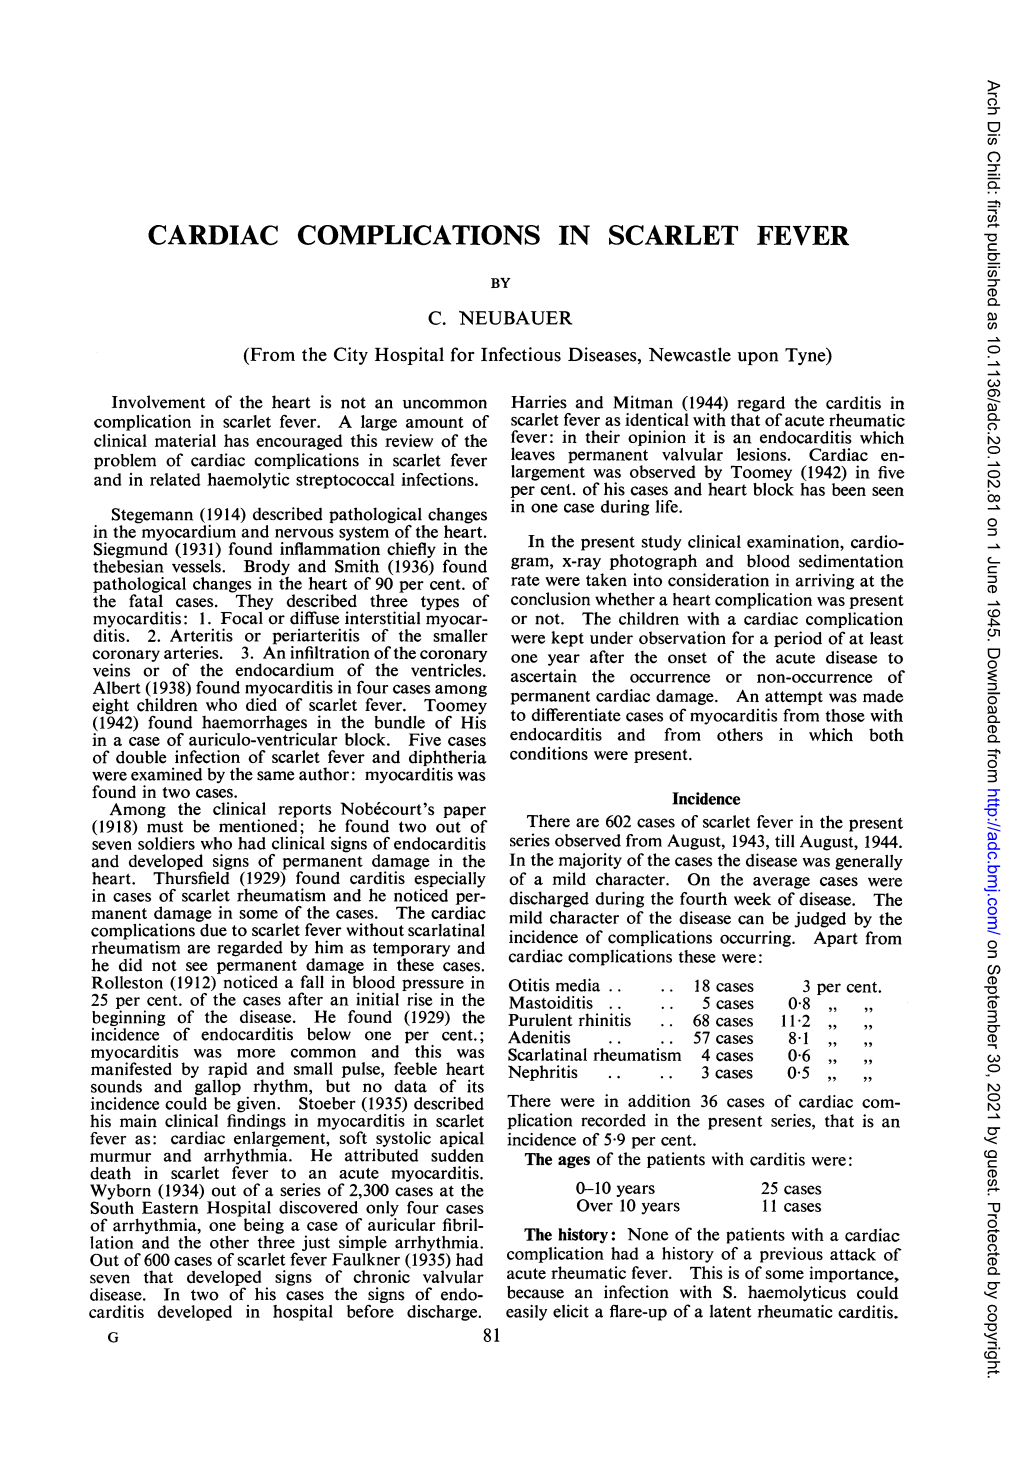 Cardiac Complications in Scarlet Fever